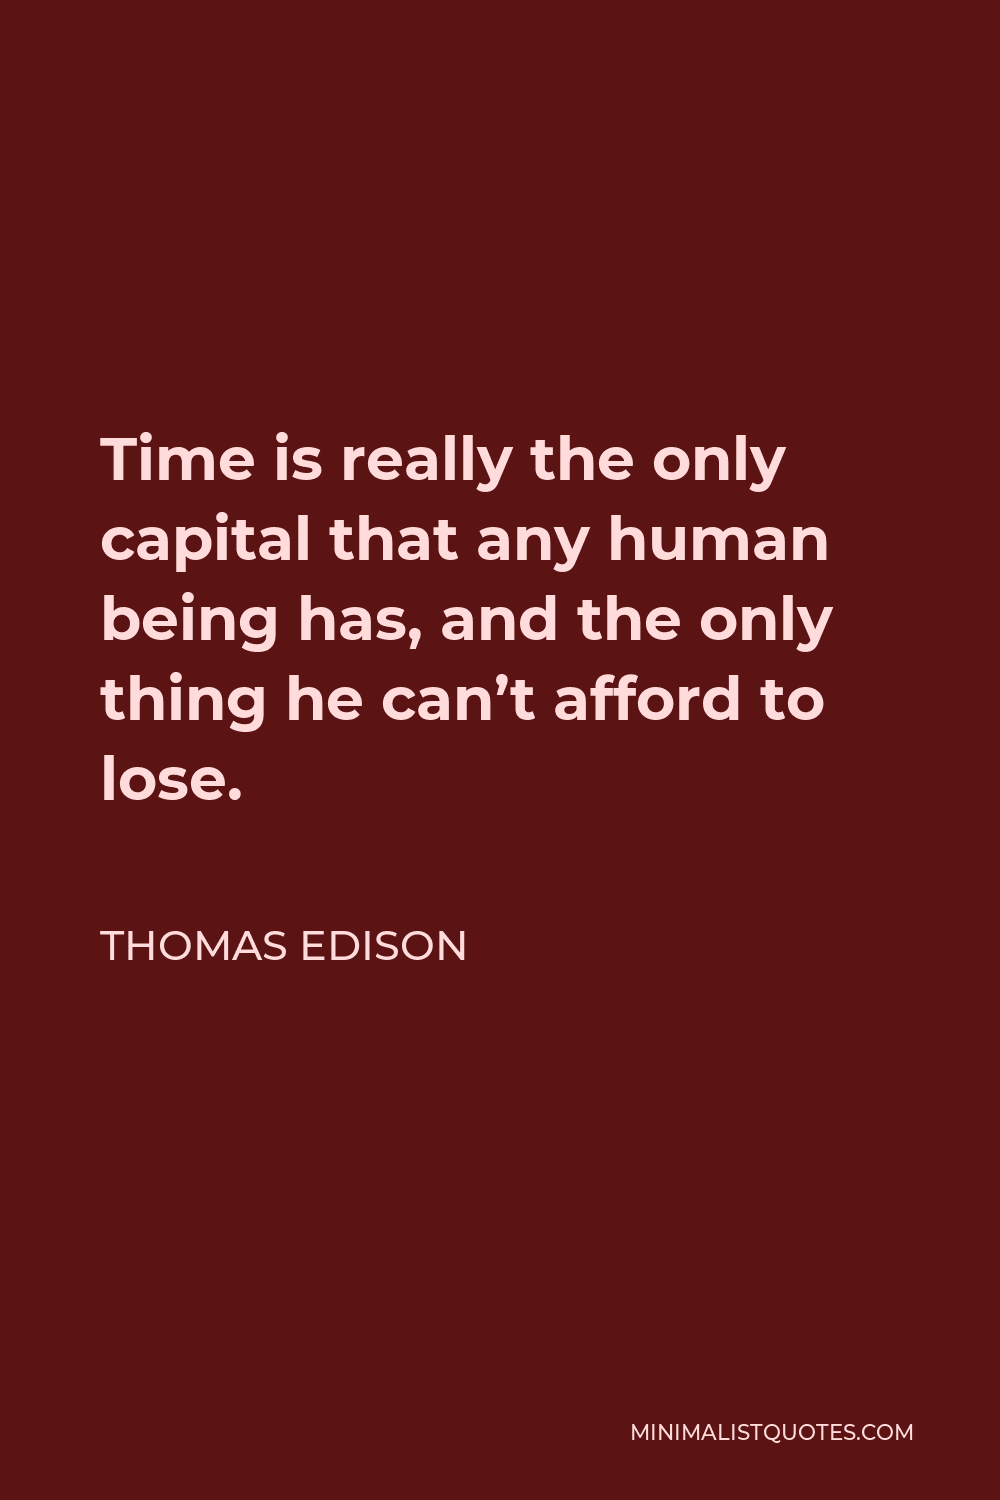 Thomas Edison Quote - Time is really the only capital that any human being has, and the only thing he can’t afford to lose.